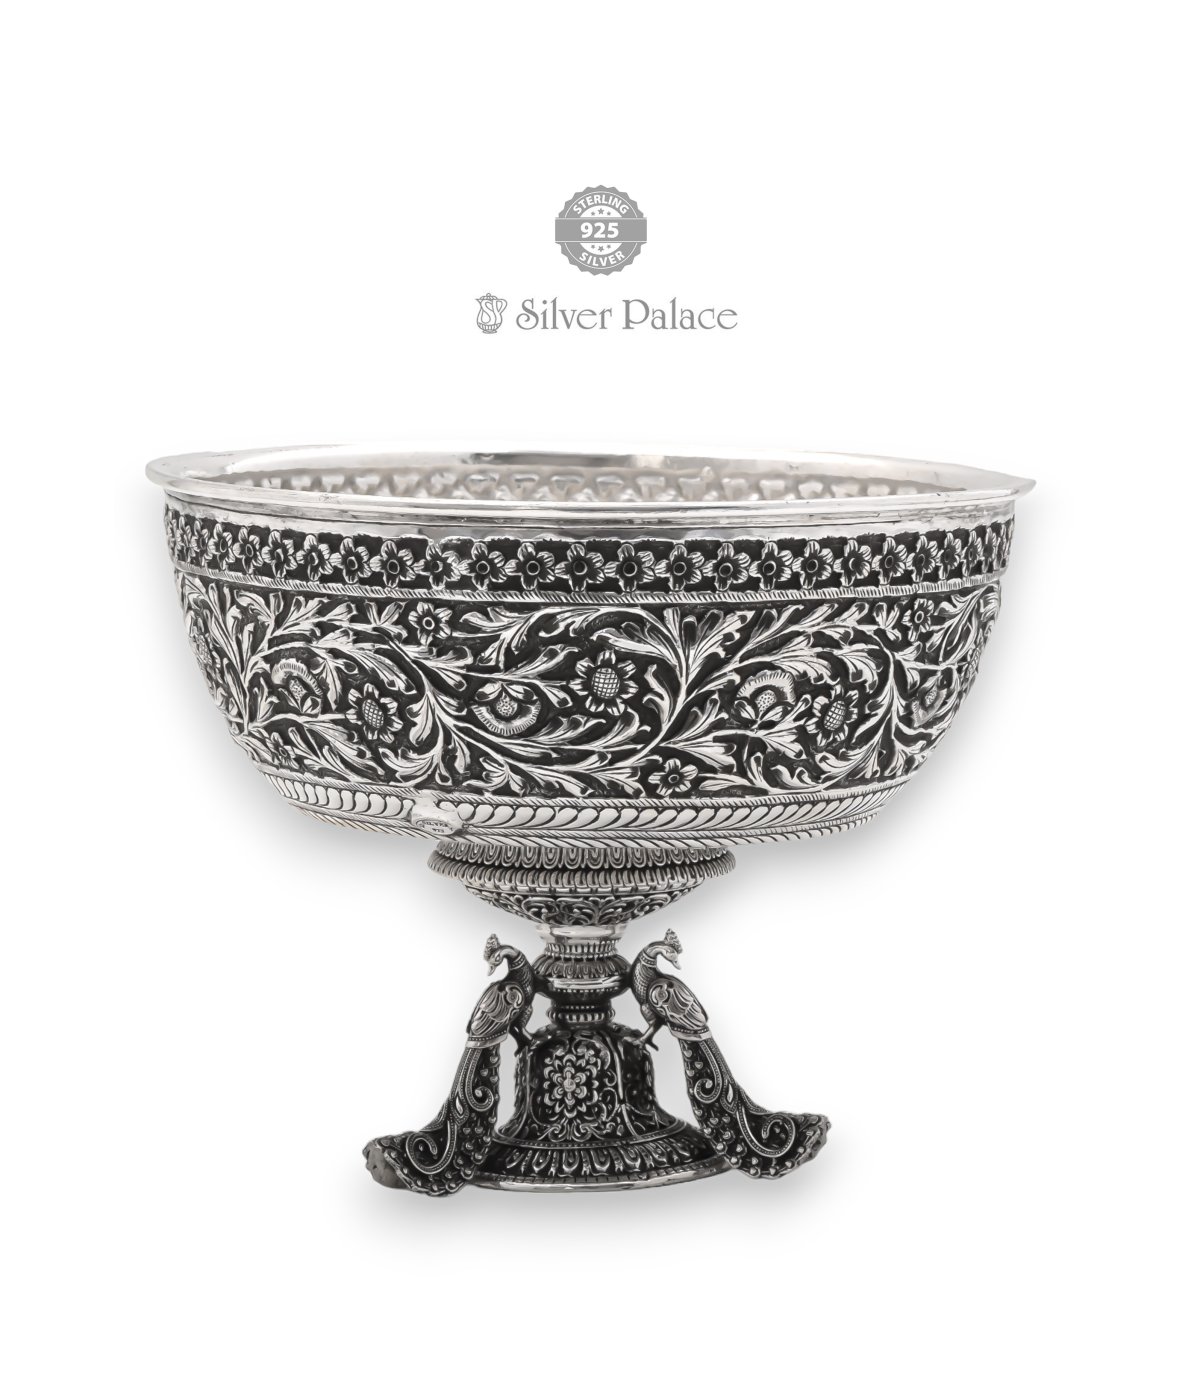  925 PURE SILVER HAND CRAFTED ANTIC SILVER BOWL 